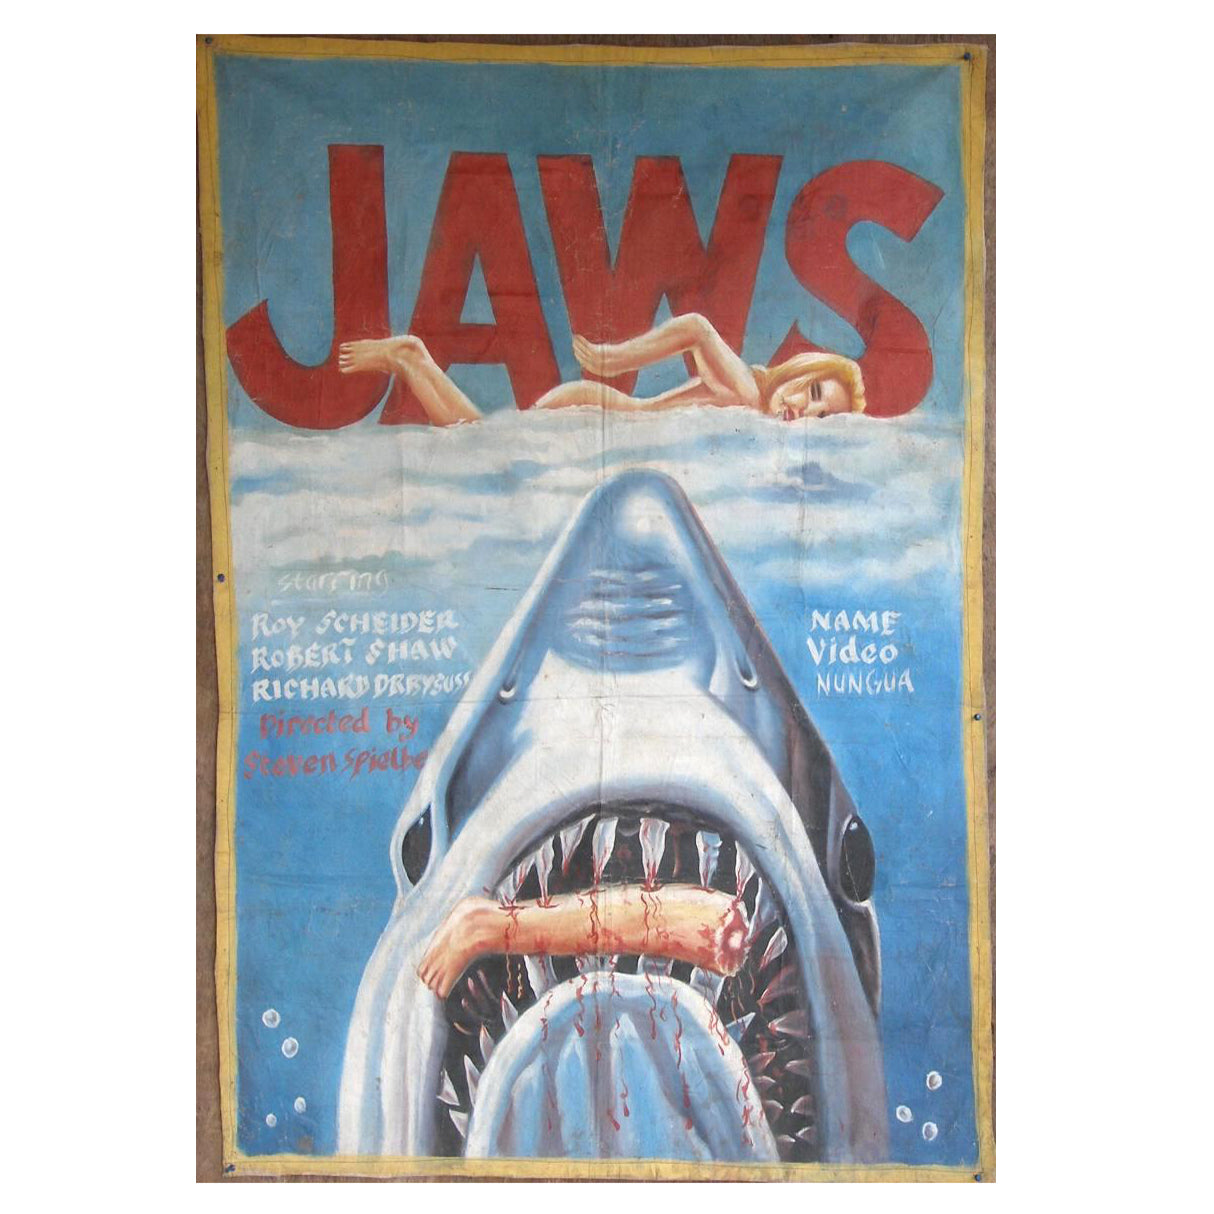 JAWS MOVIE POSTER HAND PAINTED IN GHANA FOR THE LOCAL CINEMA ART